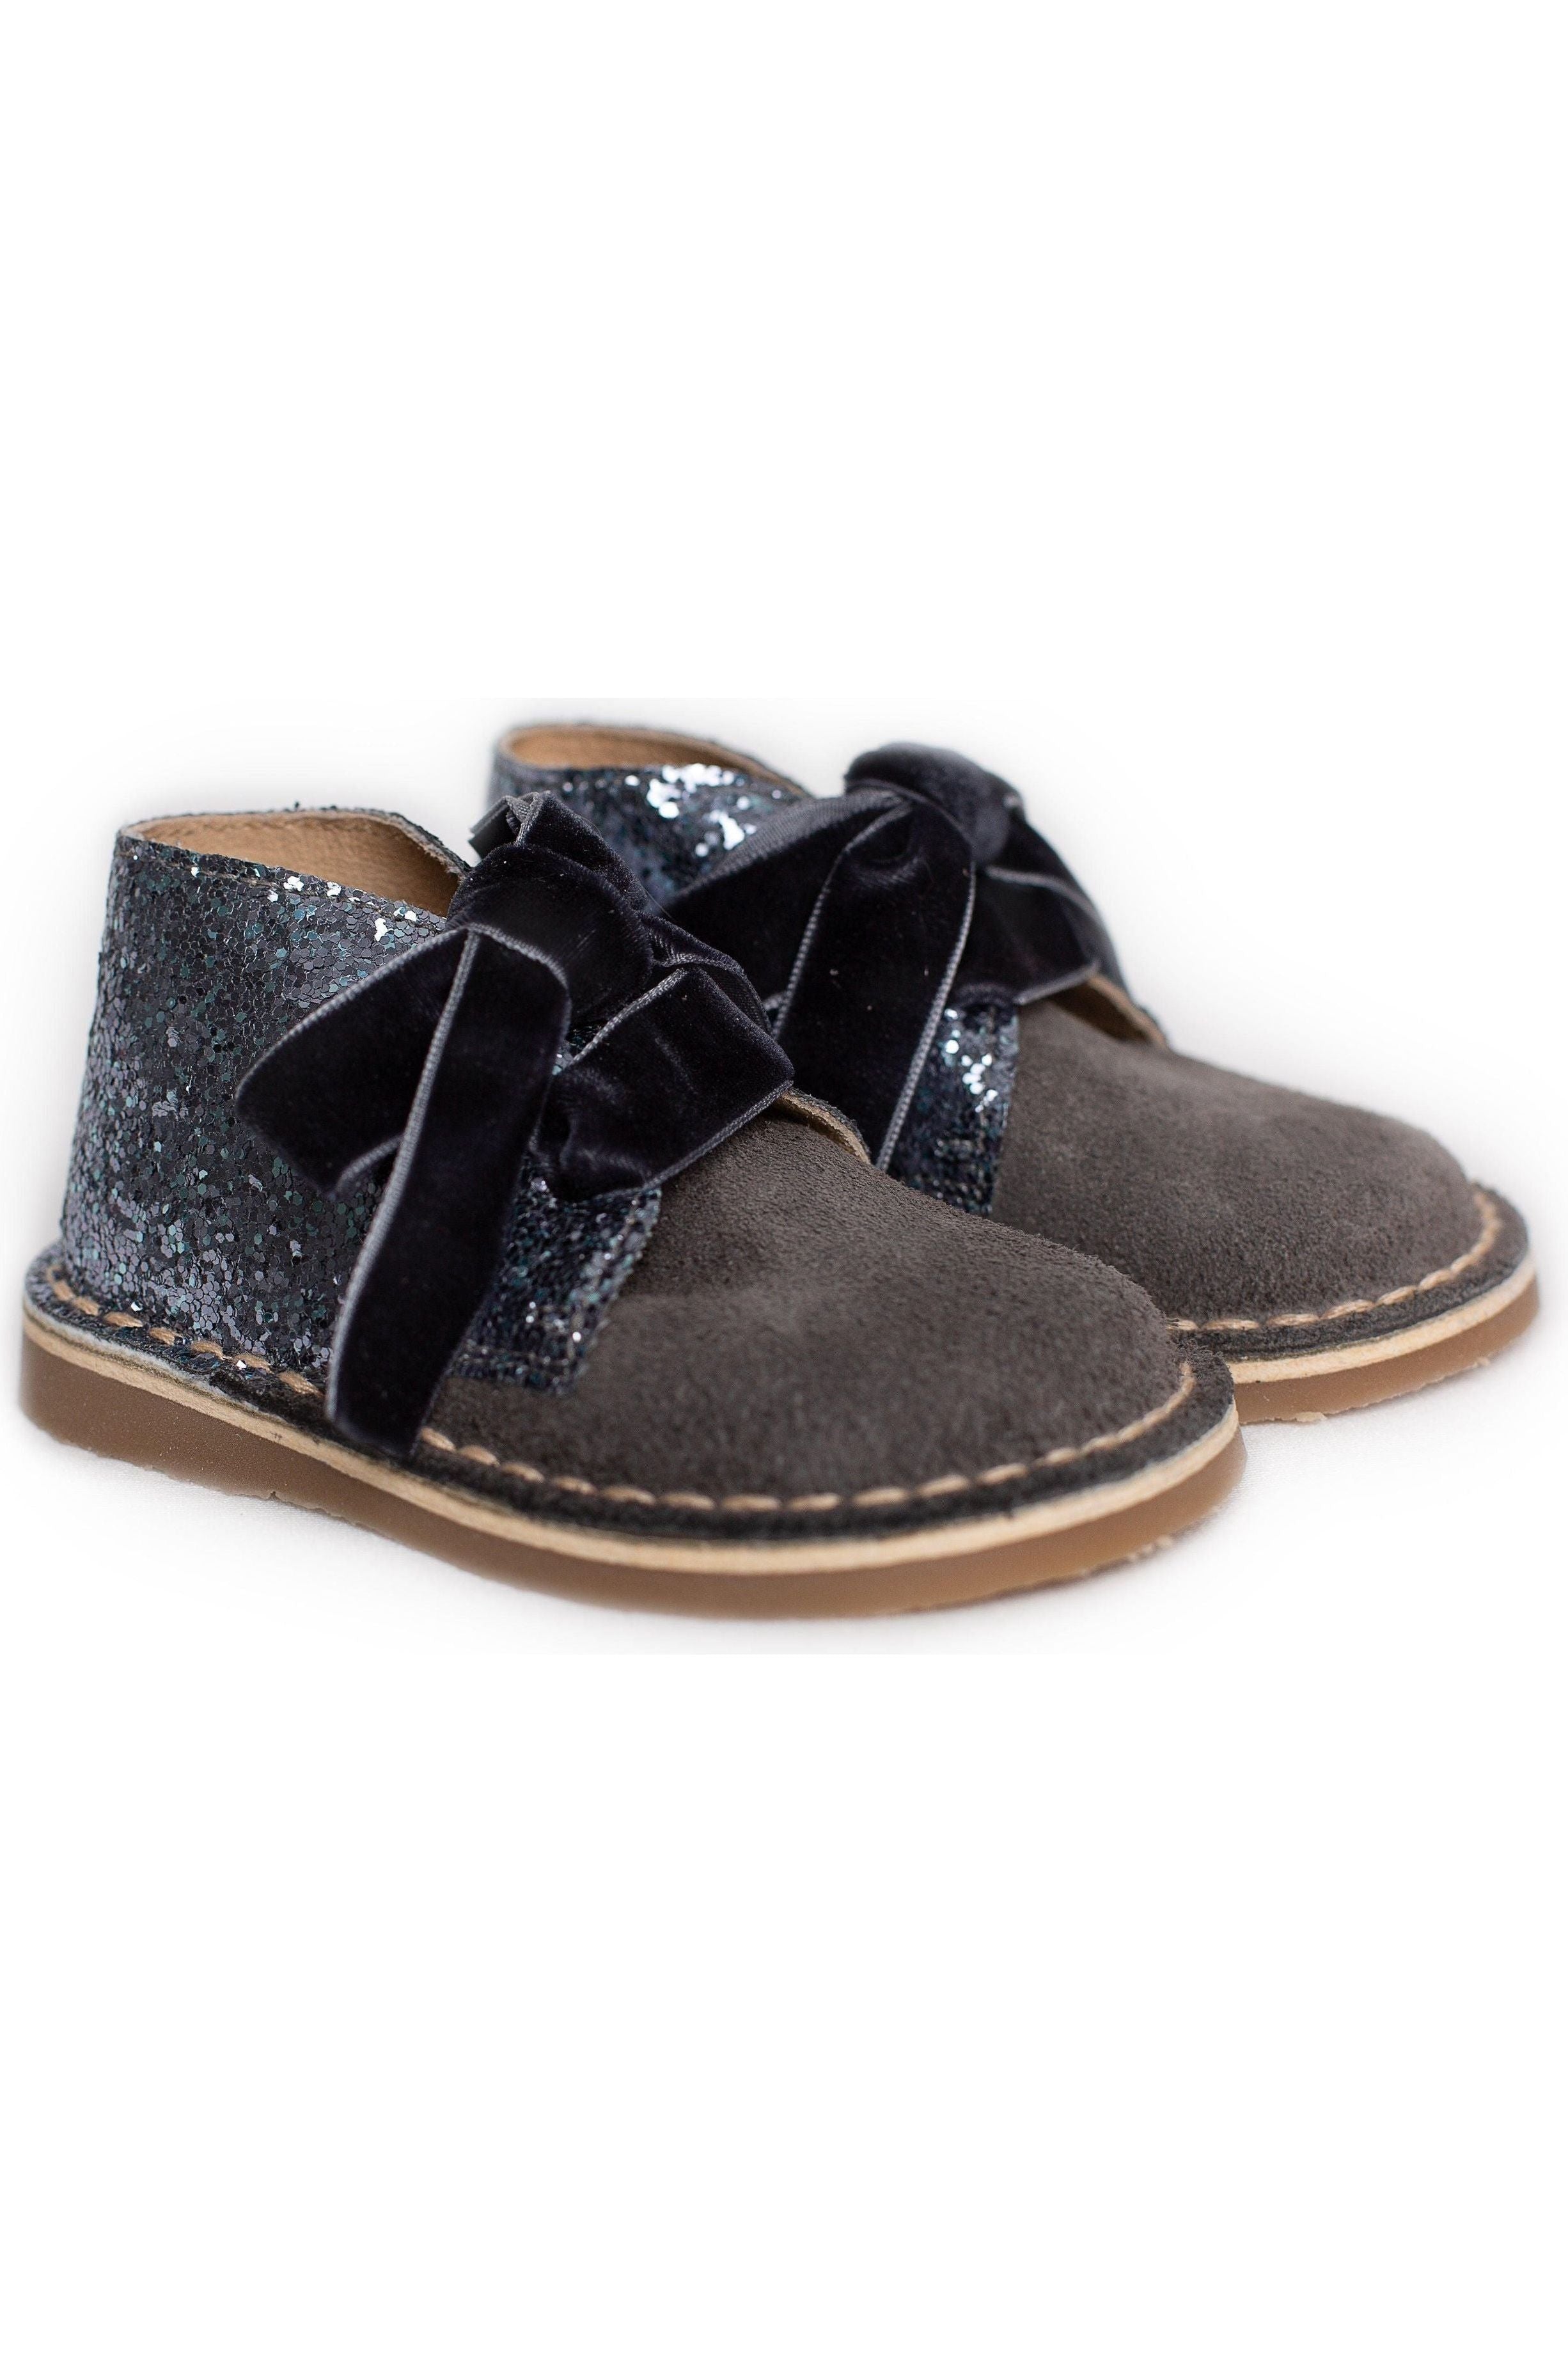 Rochy Grey Glitter Boots NON RETURNABLE Dainty Delilah 